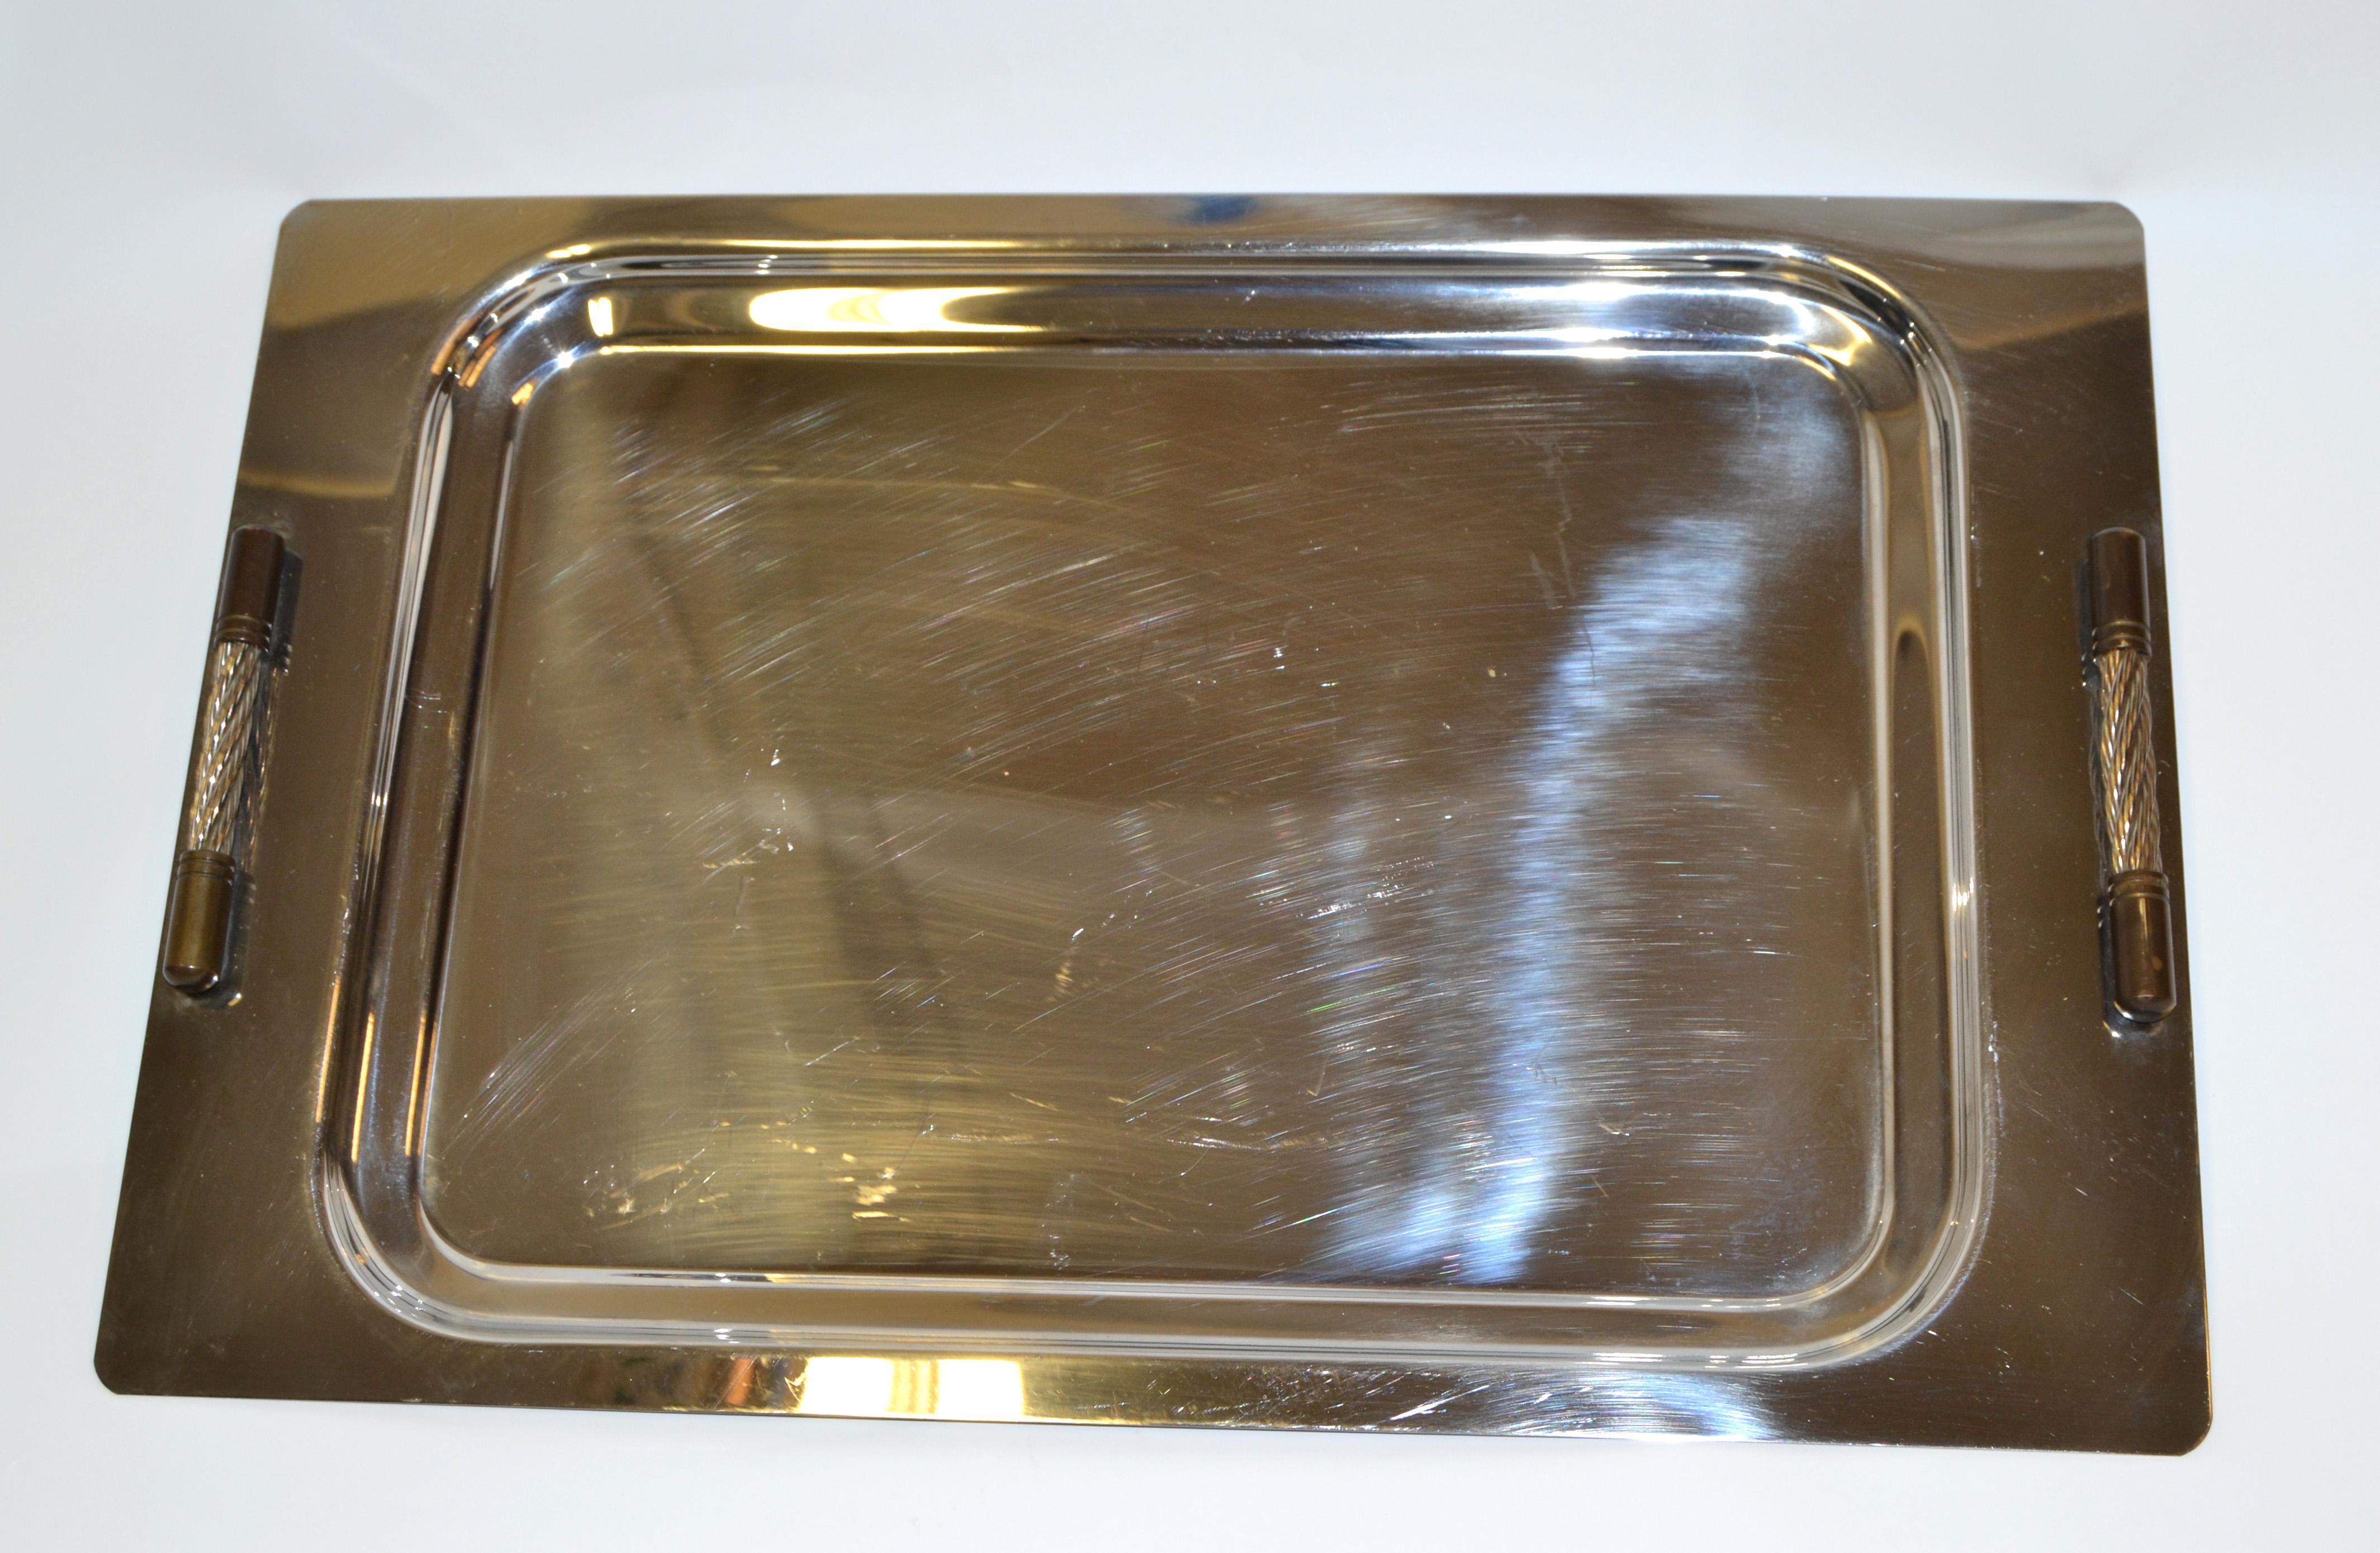 20th Century Golden Art Steel Design Argentina Serving Tray Inox 18/8 Stainless Steel, 1980 For Sale